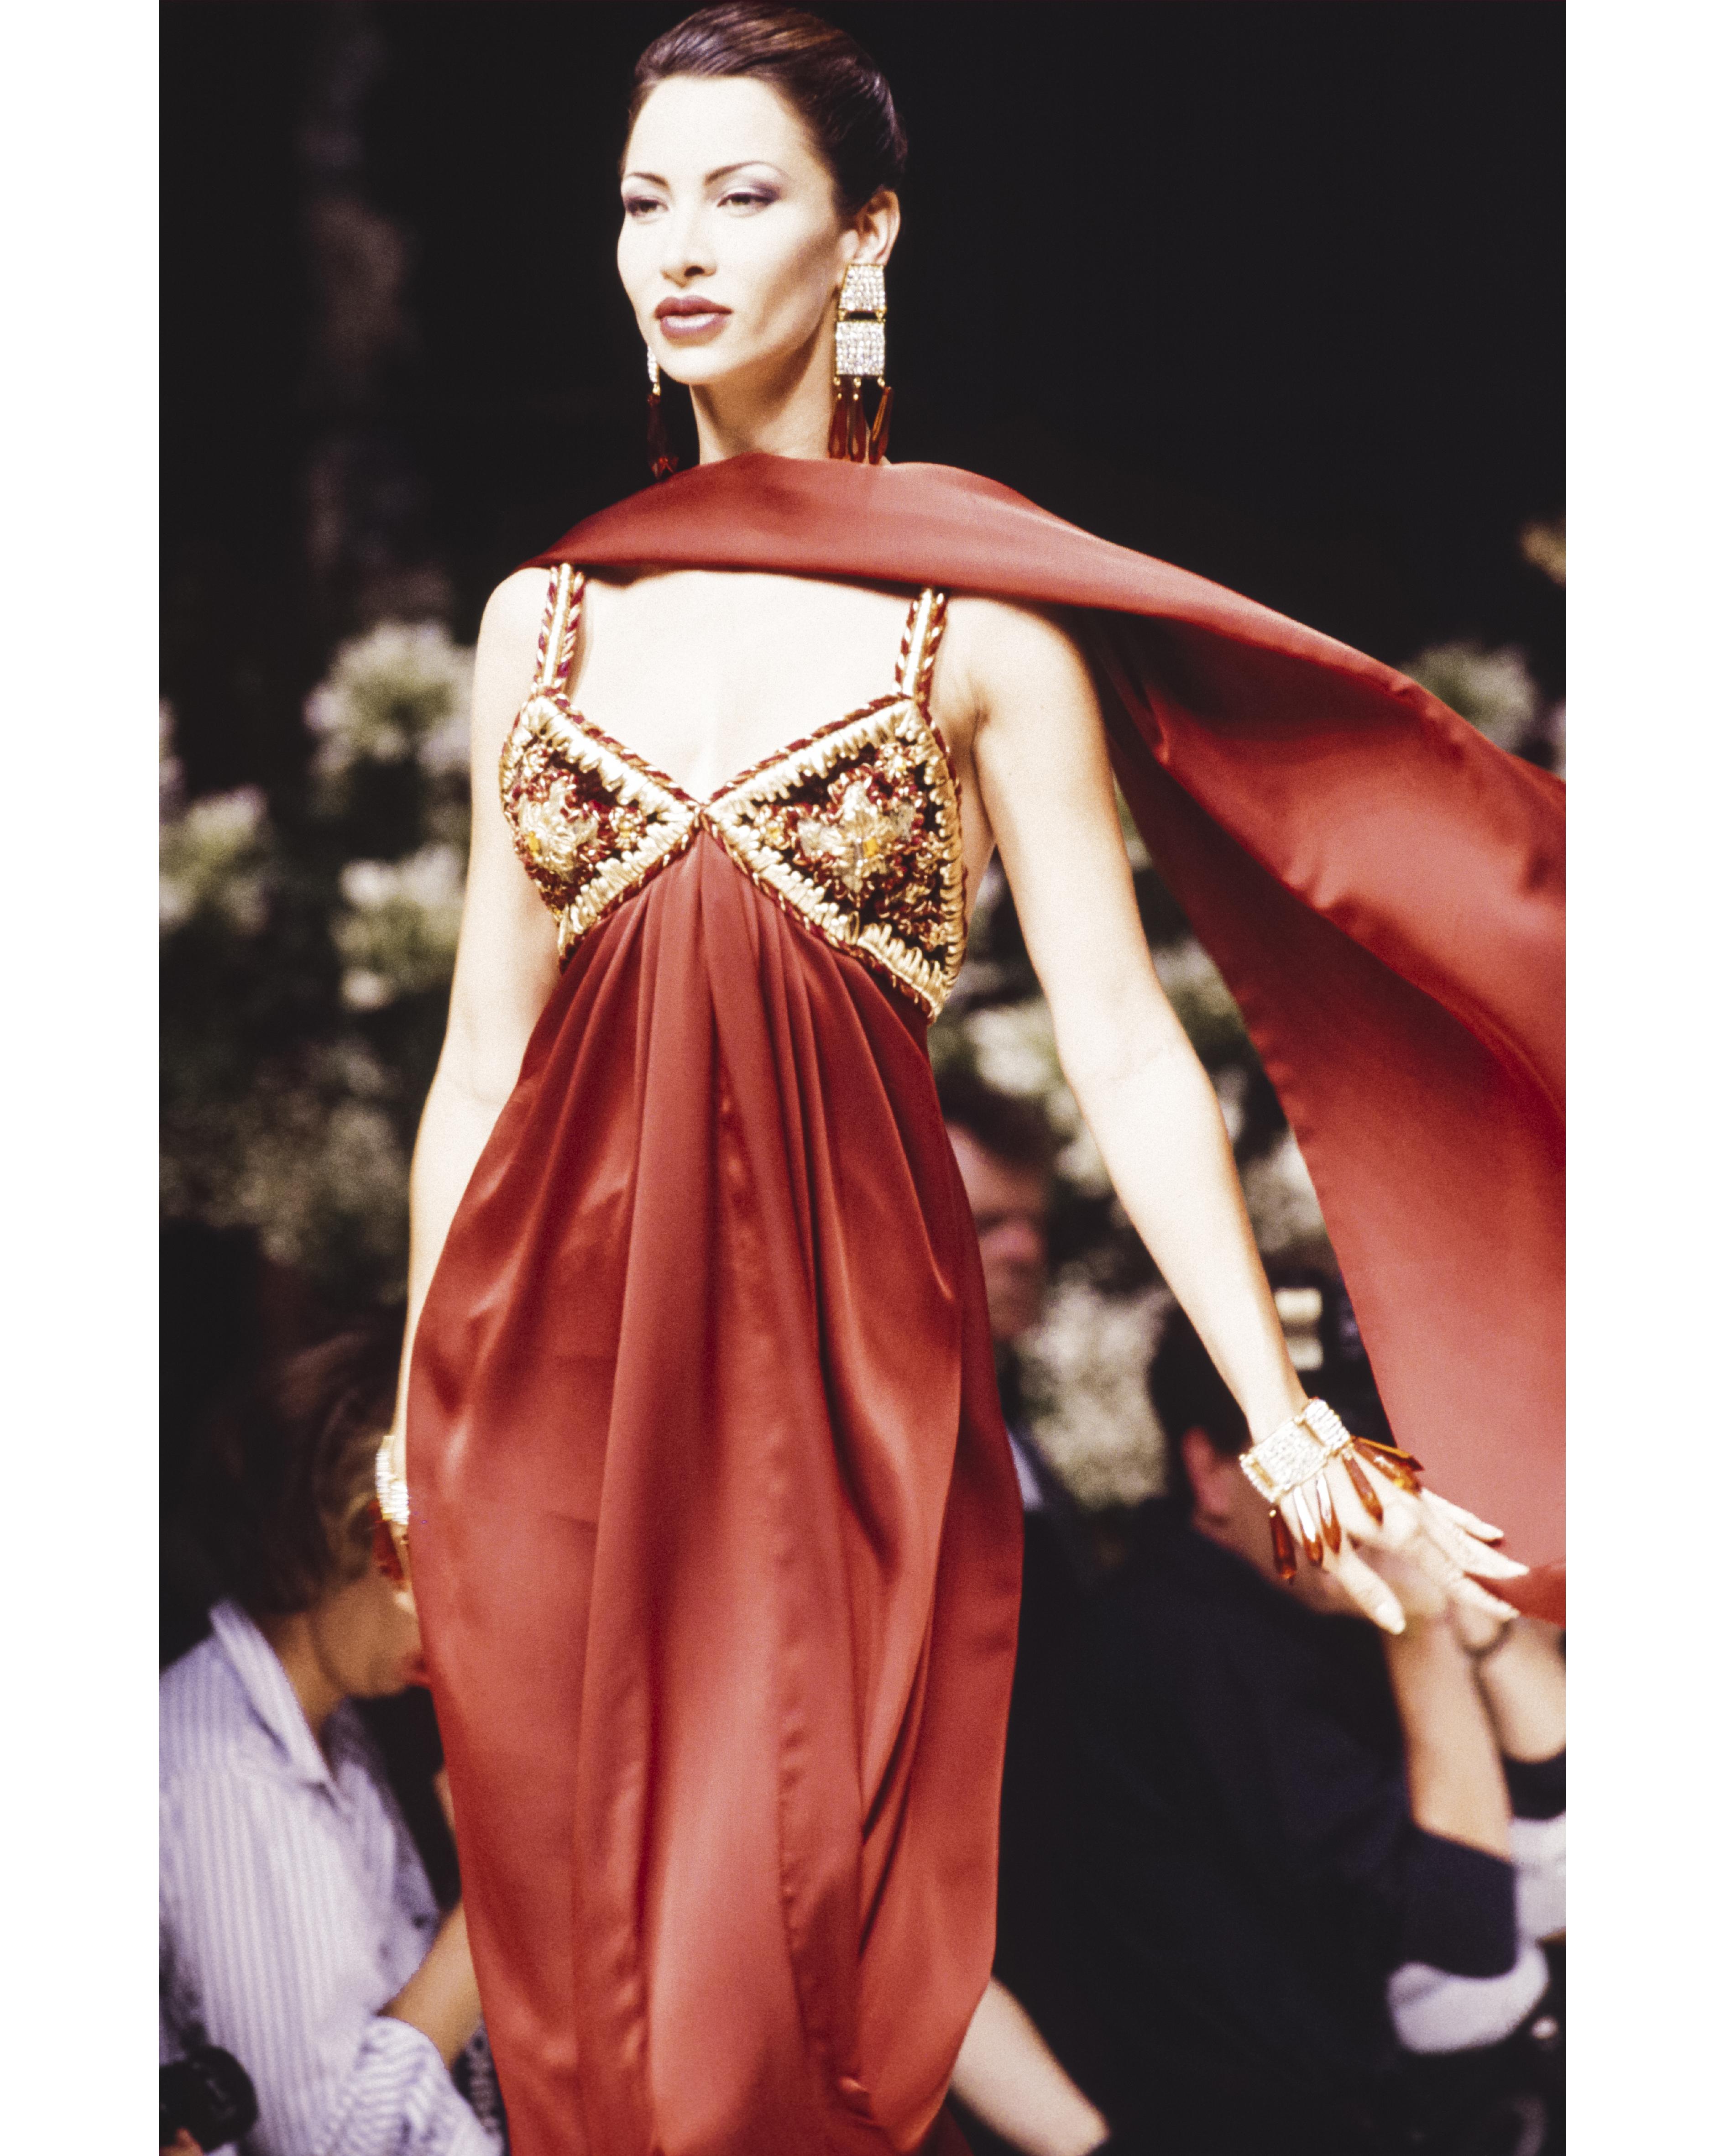 A/W 1993 Givenchy Haute Couture embroidered velvet midi dress. Red-orange fitted dress with gold and floral pattern embroidered bust, utilizing raffia and velvet with center orange oversize rhinestone detail. Sleeveless dress with back snap